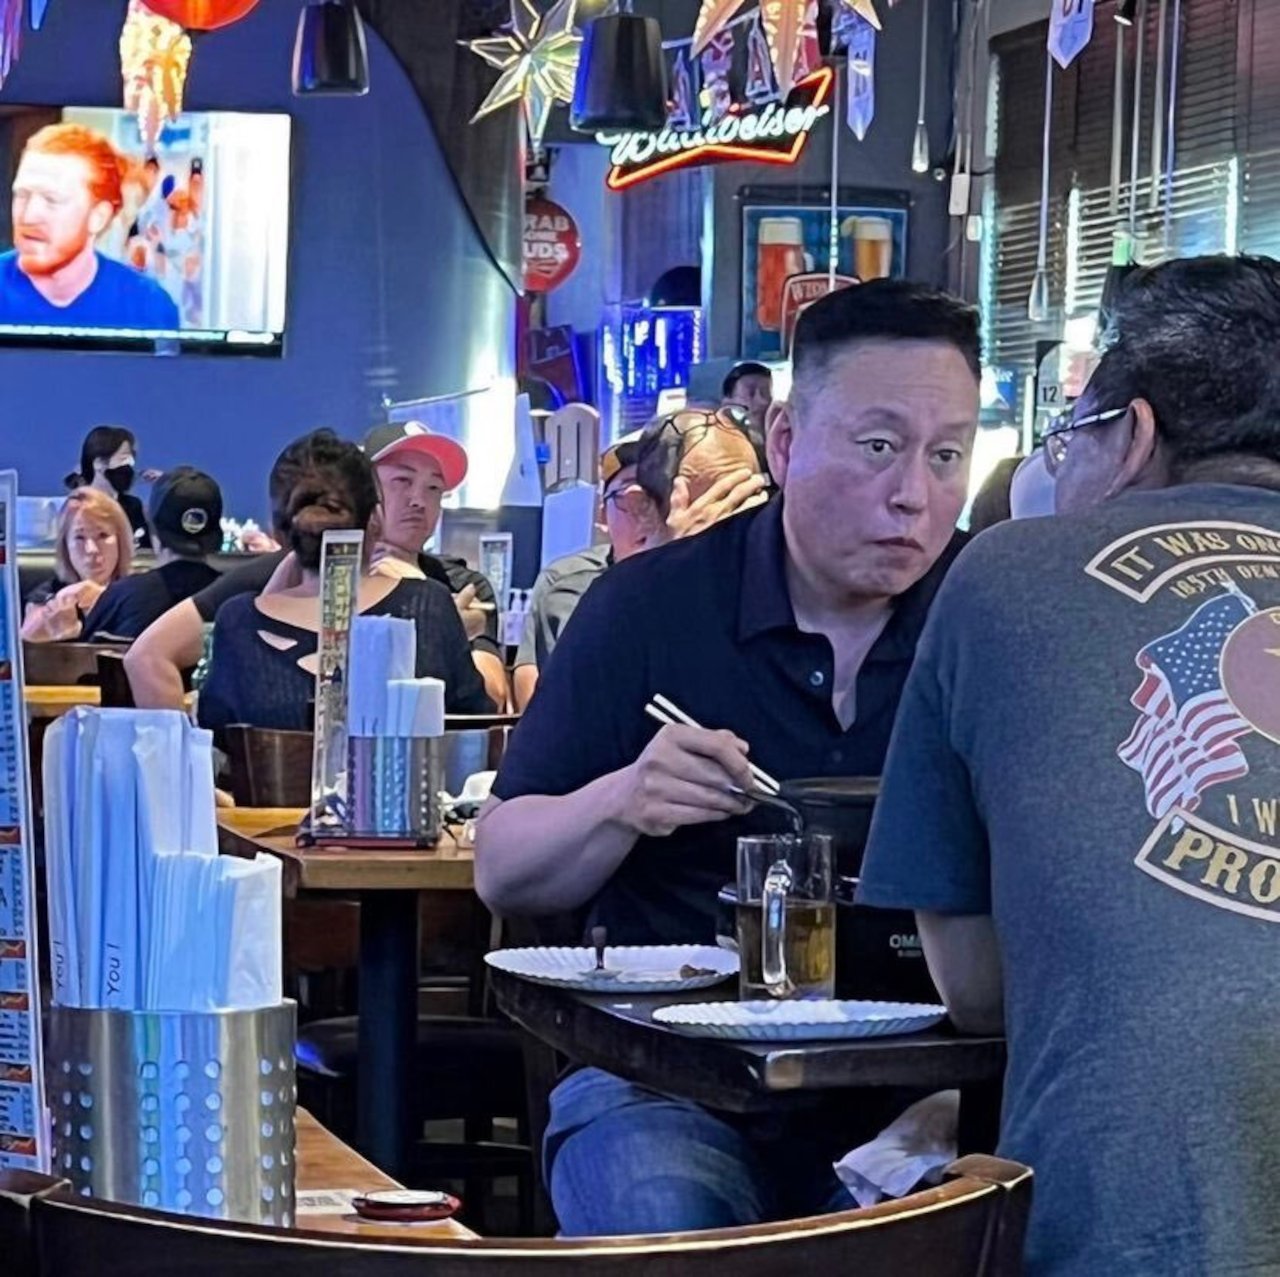 Another Elon Musk Doppelganger Emerges In China, and This One Is No Deepfake